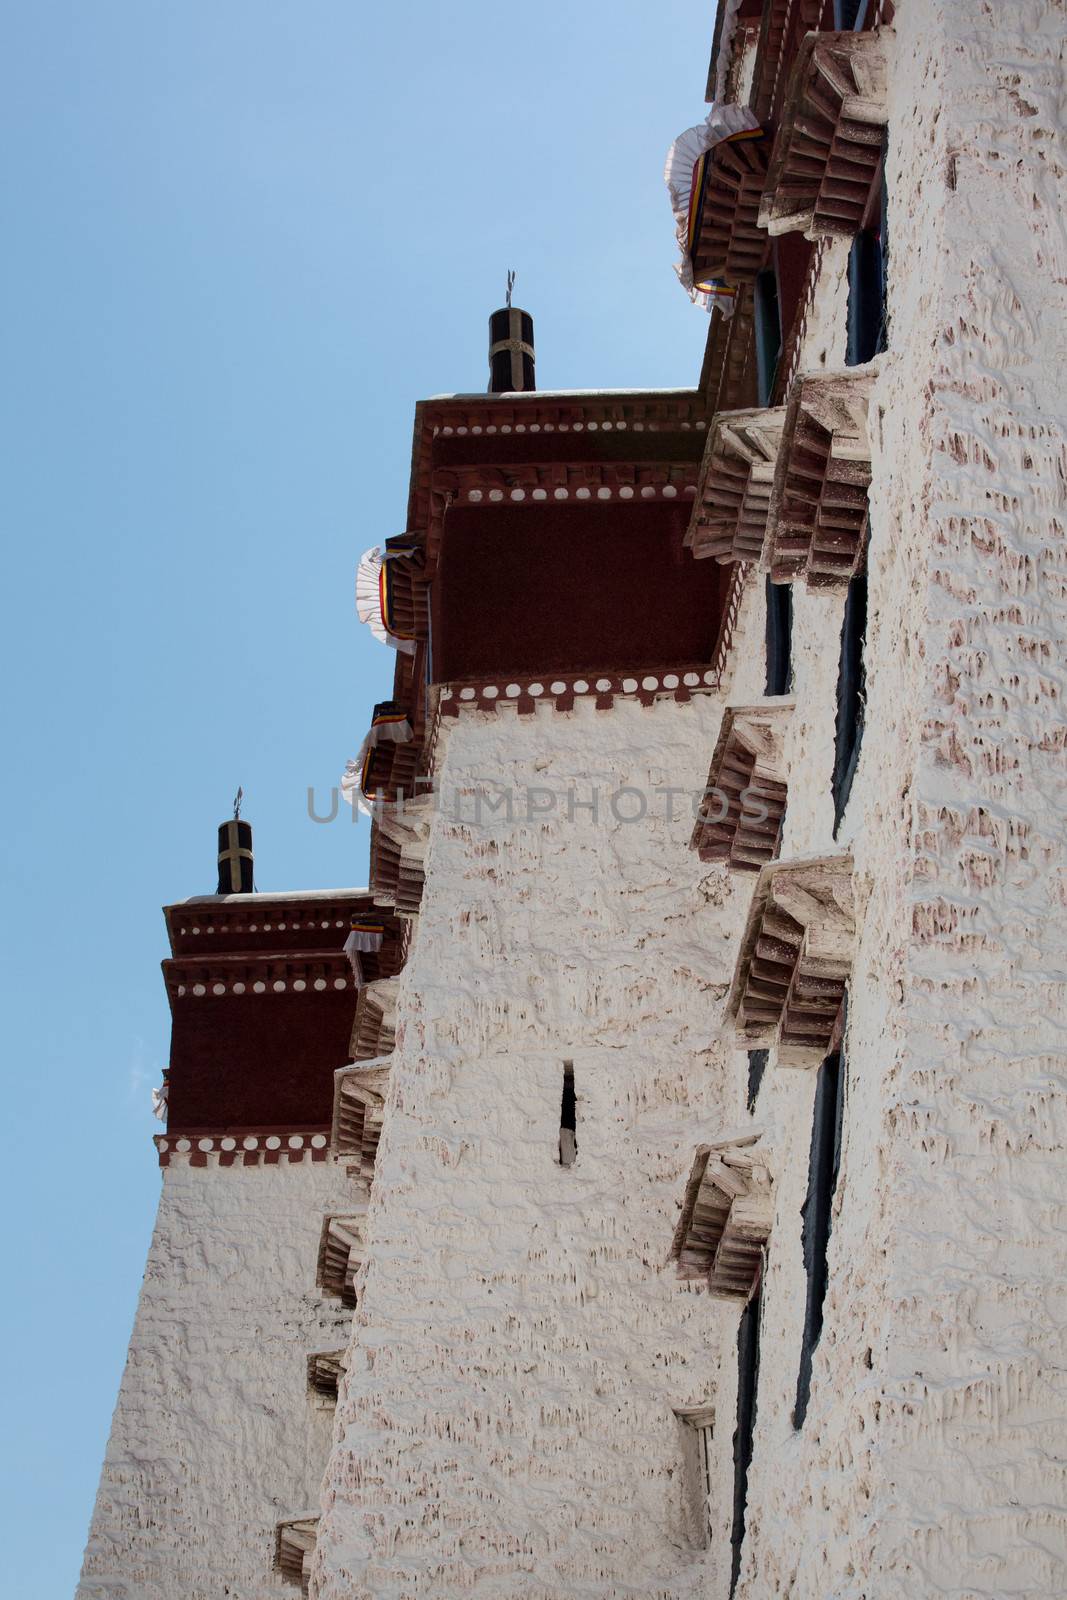 Detail of the Potala Palace in Lhasa by watchtheworld